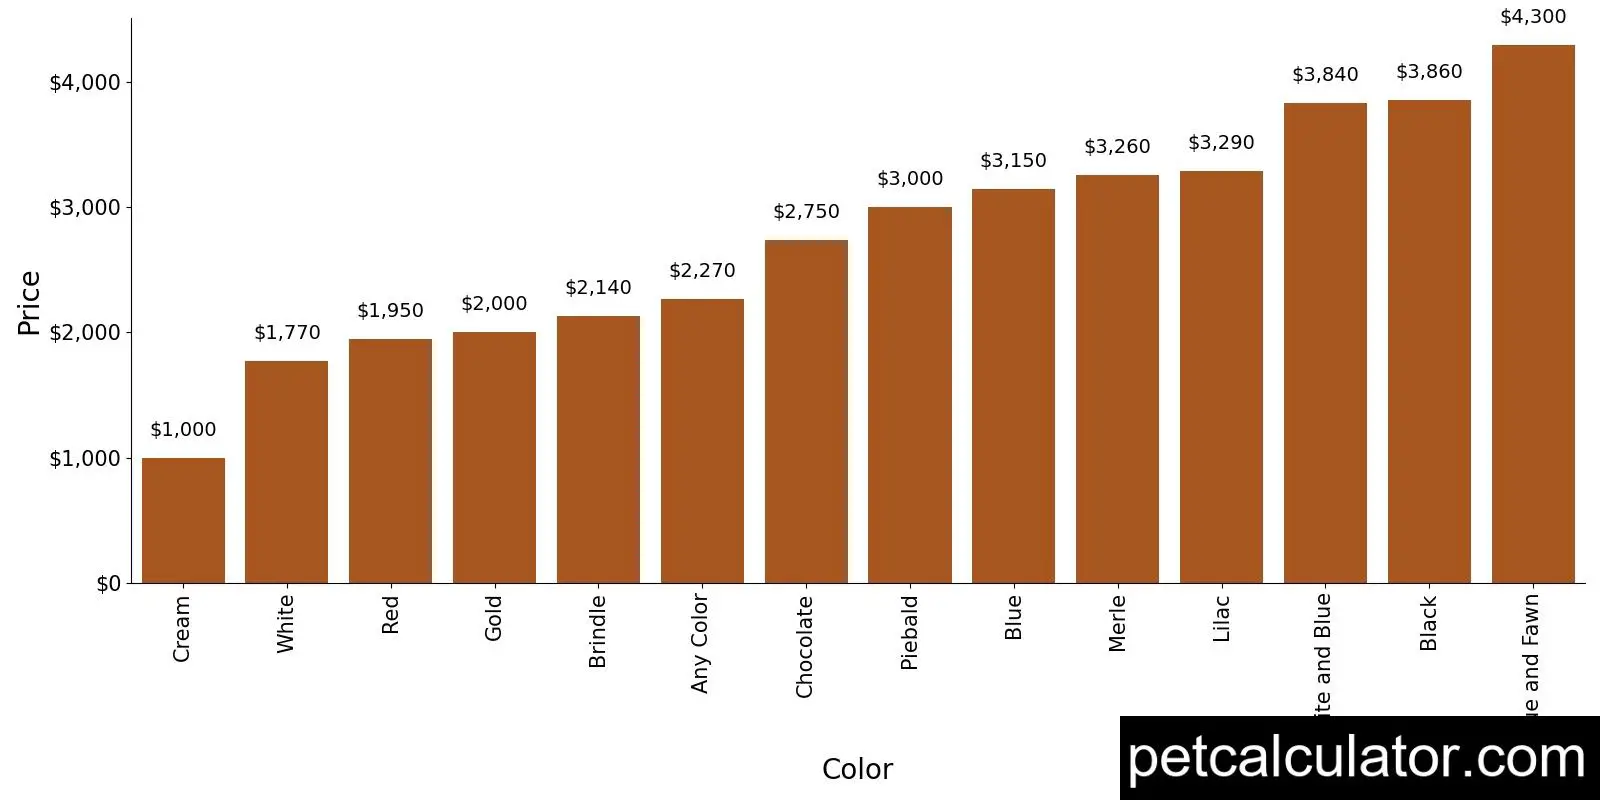 Price of Olde English Bulldogge by Color 